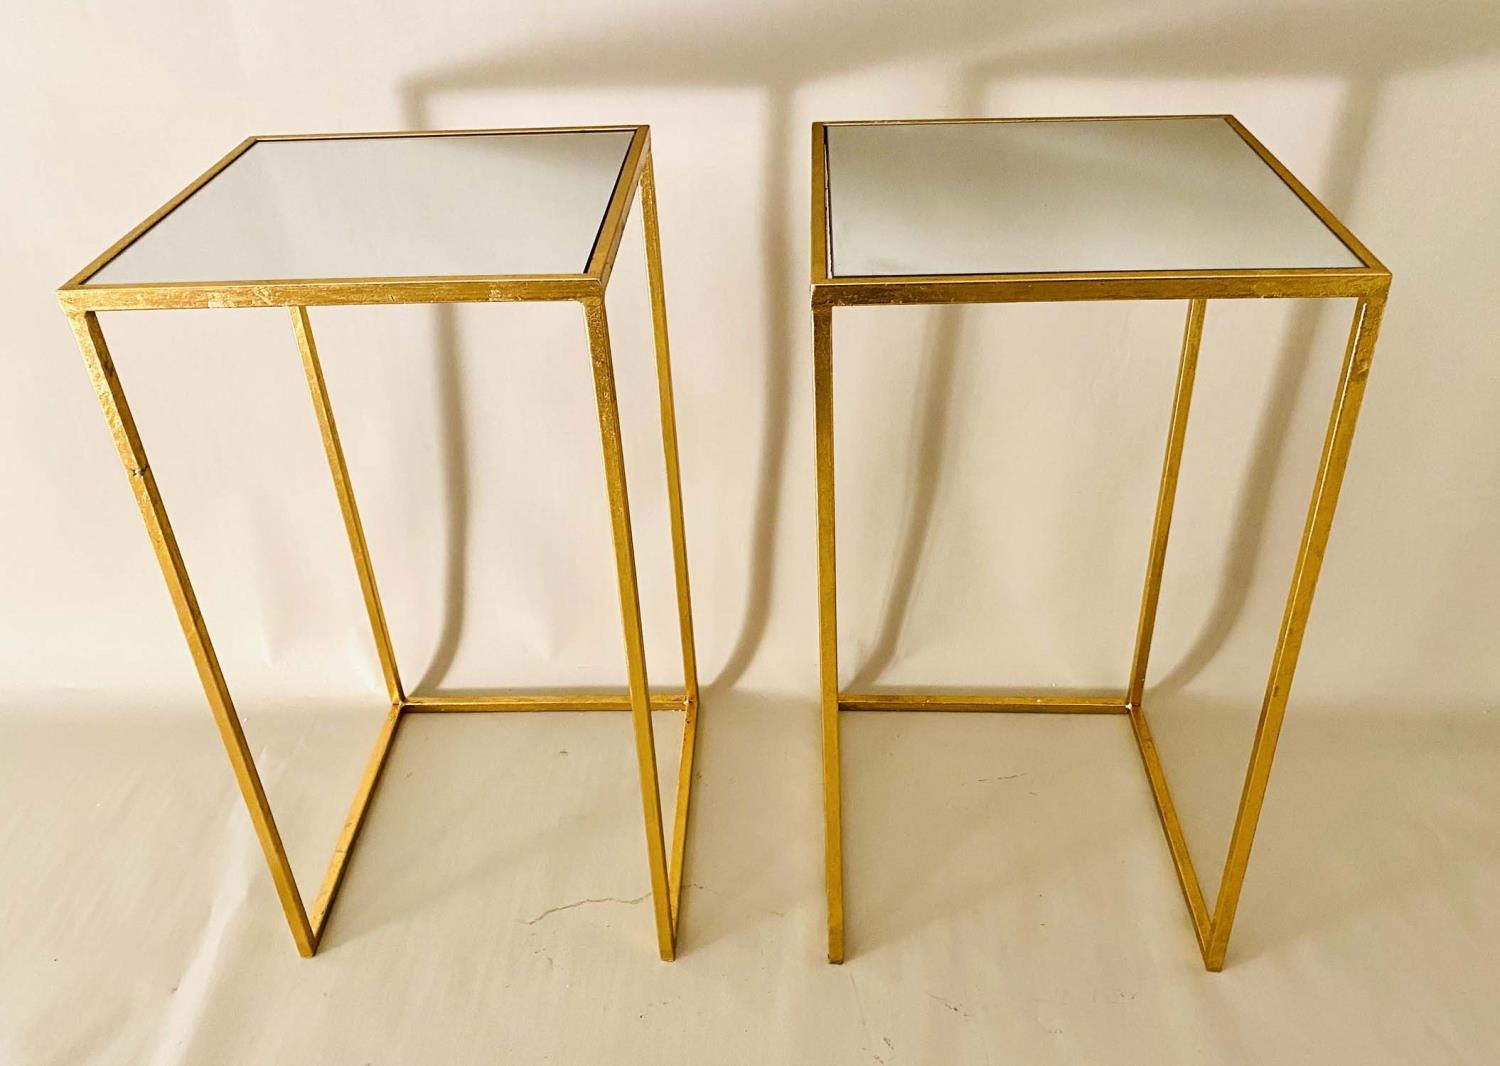 SIDE TABLES, a pair, 66cm H x 36cm W, 1960's French style, mirrored glass tops, gilt metal